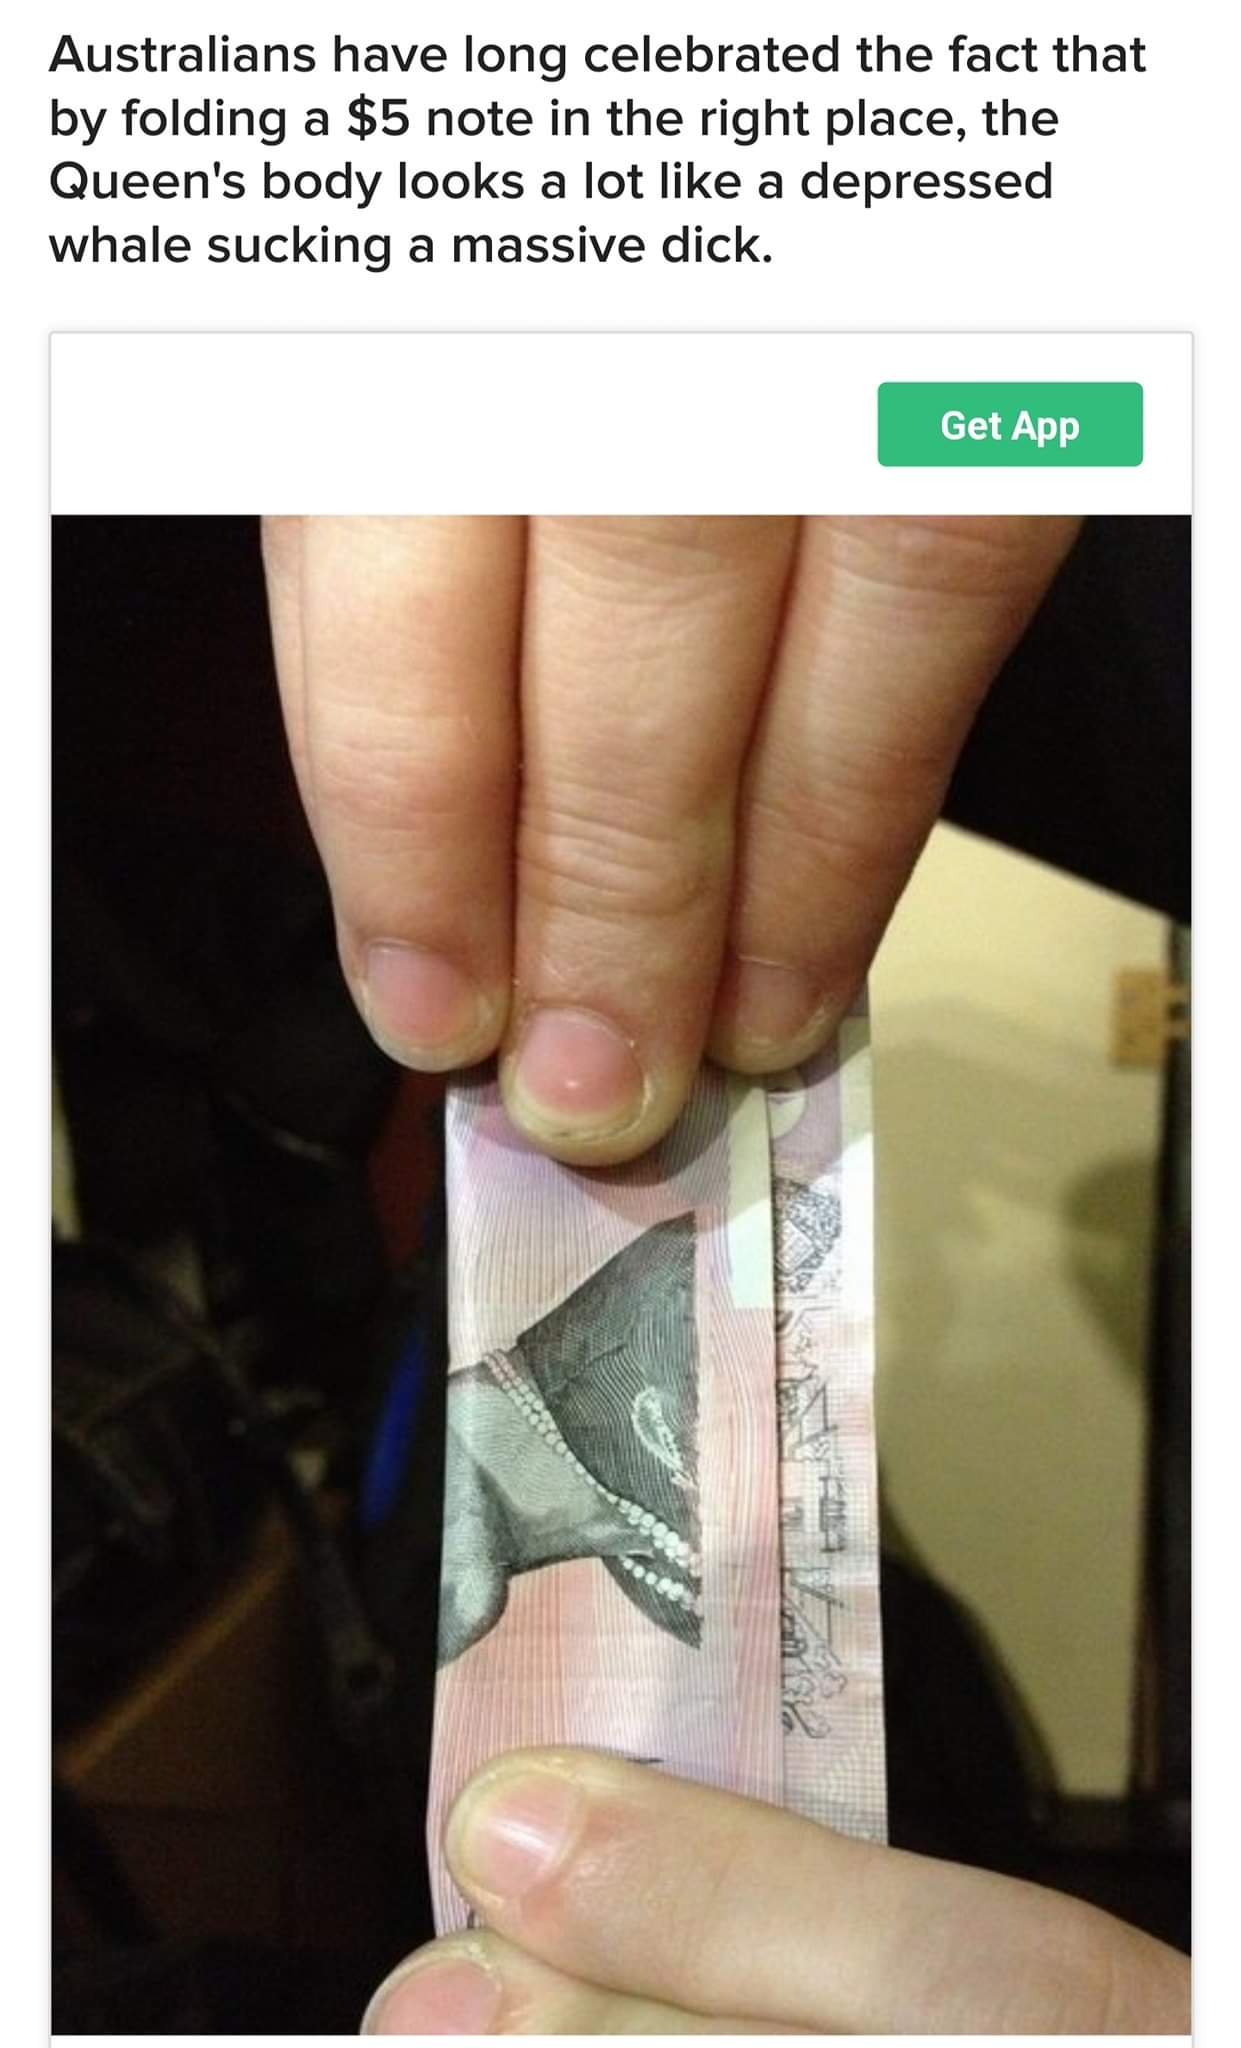 nail - Australians have long celebrated the fact that by folding a $5 note in the right place, the Queen's body looks a lot a depressed whale sucking a massive dick. Get App